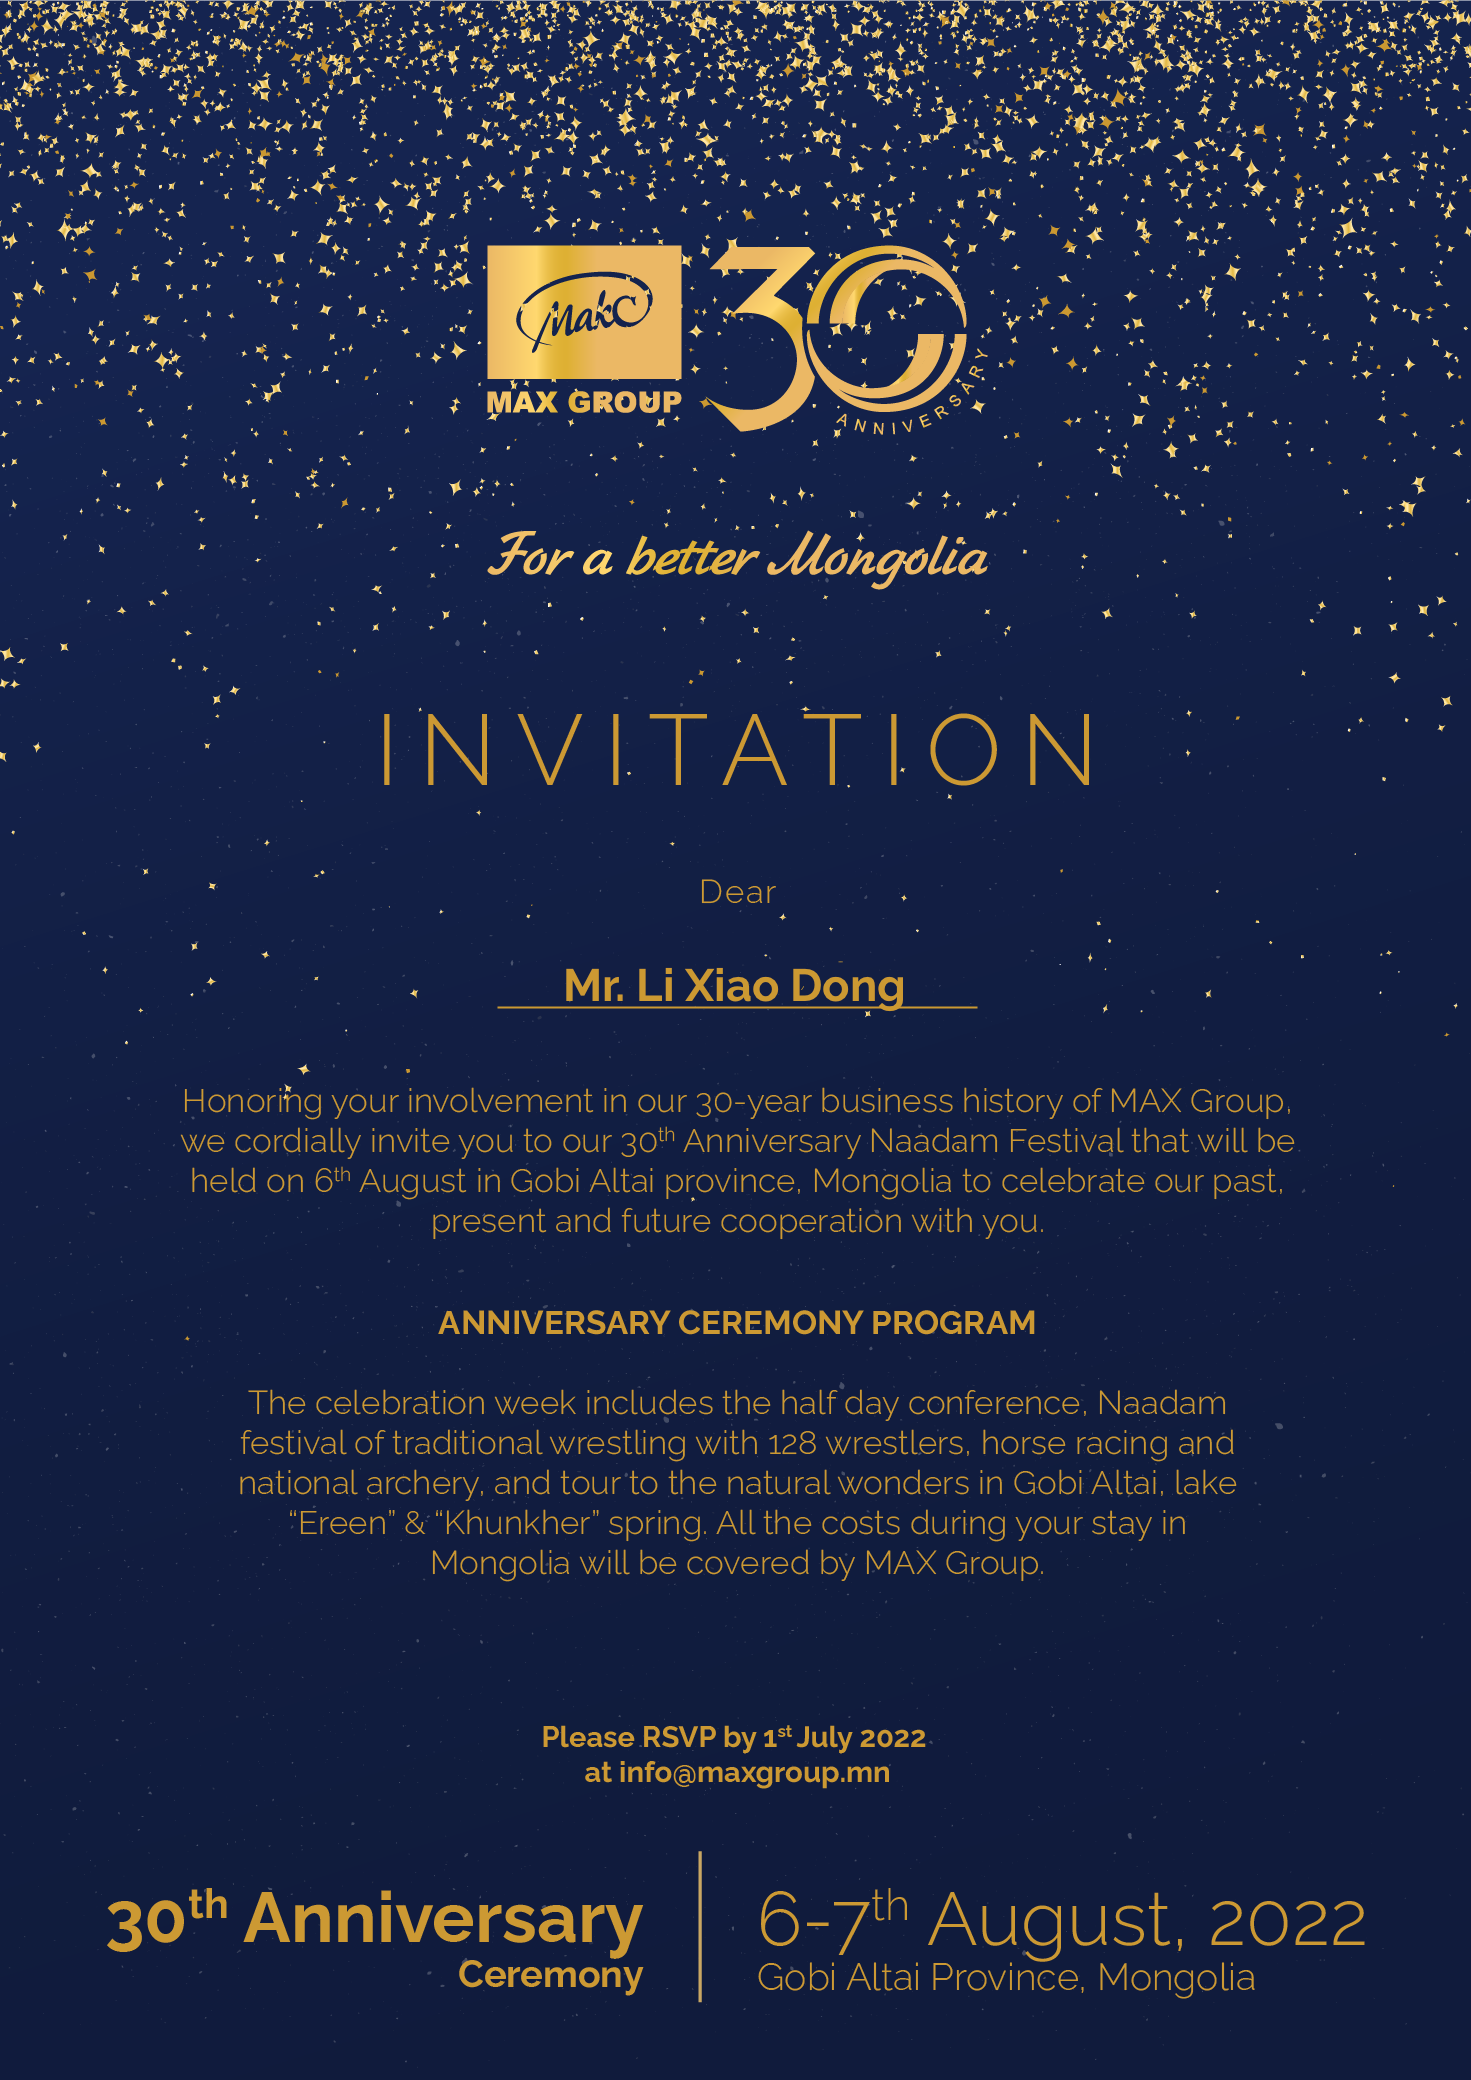 Congratulations on the 30th anniversary of Mongolia Max Group